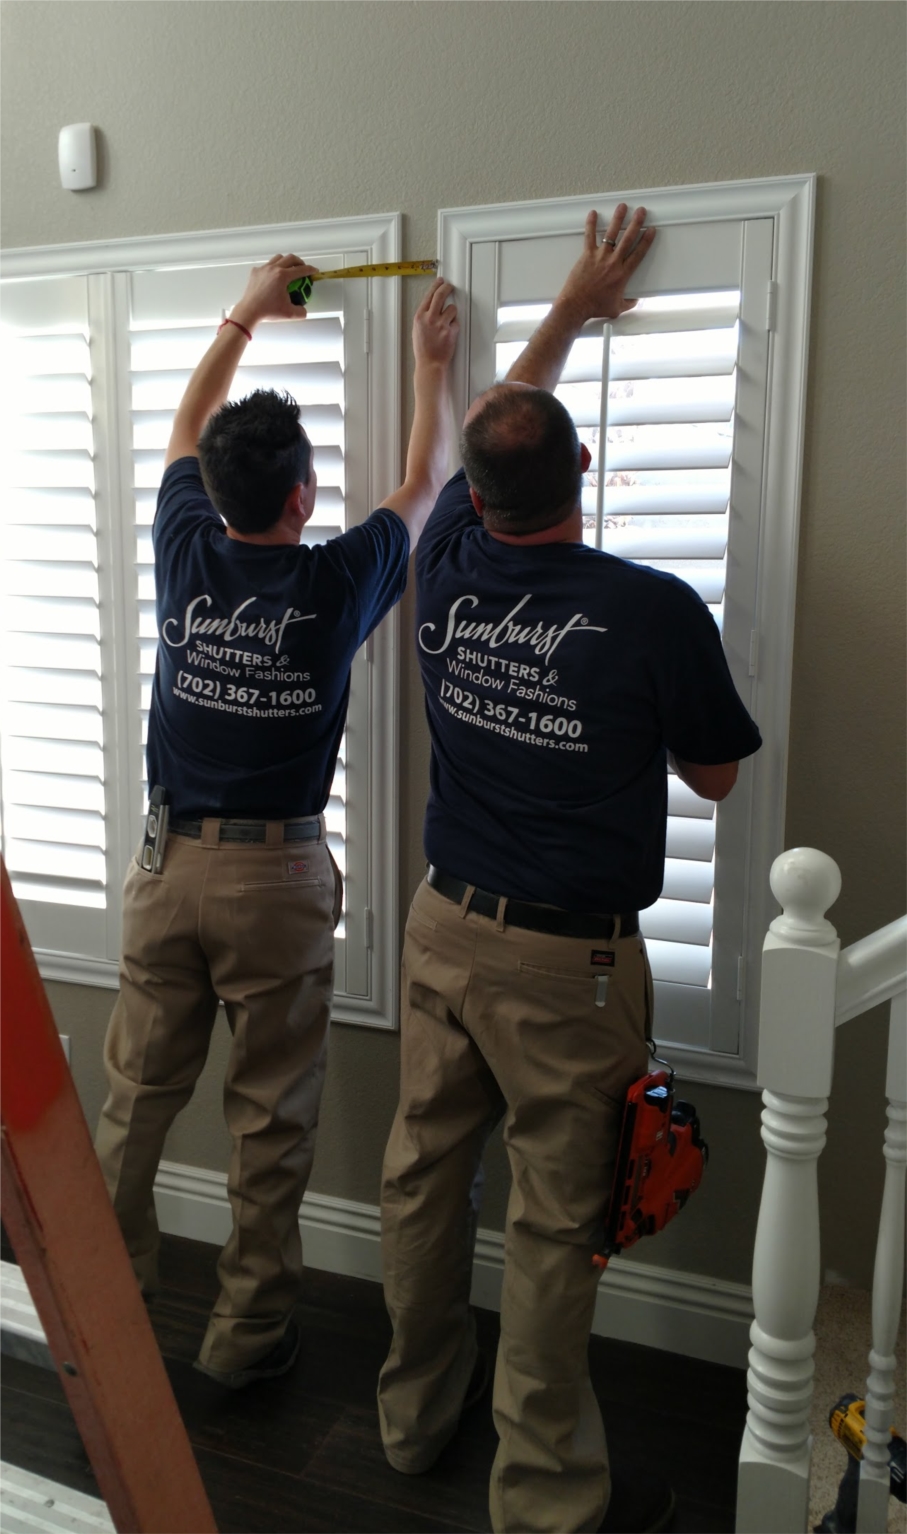 For over 40 years we have been perfecting the craft of our award-winning interior shutters & customer service.  Leave the work to us, our pros come to you and  measure your windows with precision for speedy & turnkey installation.
